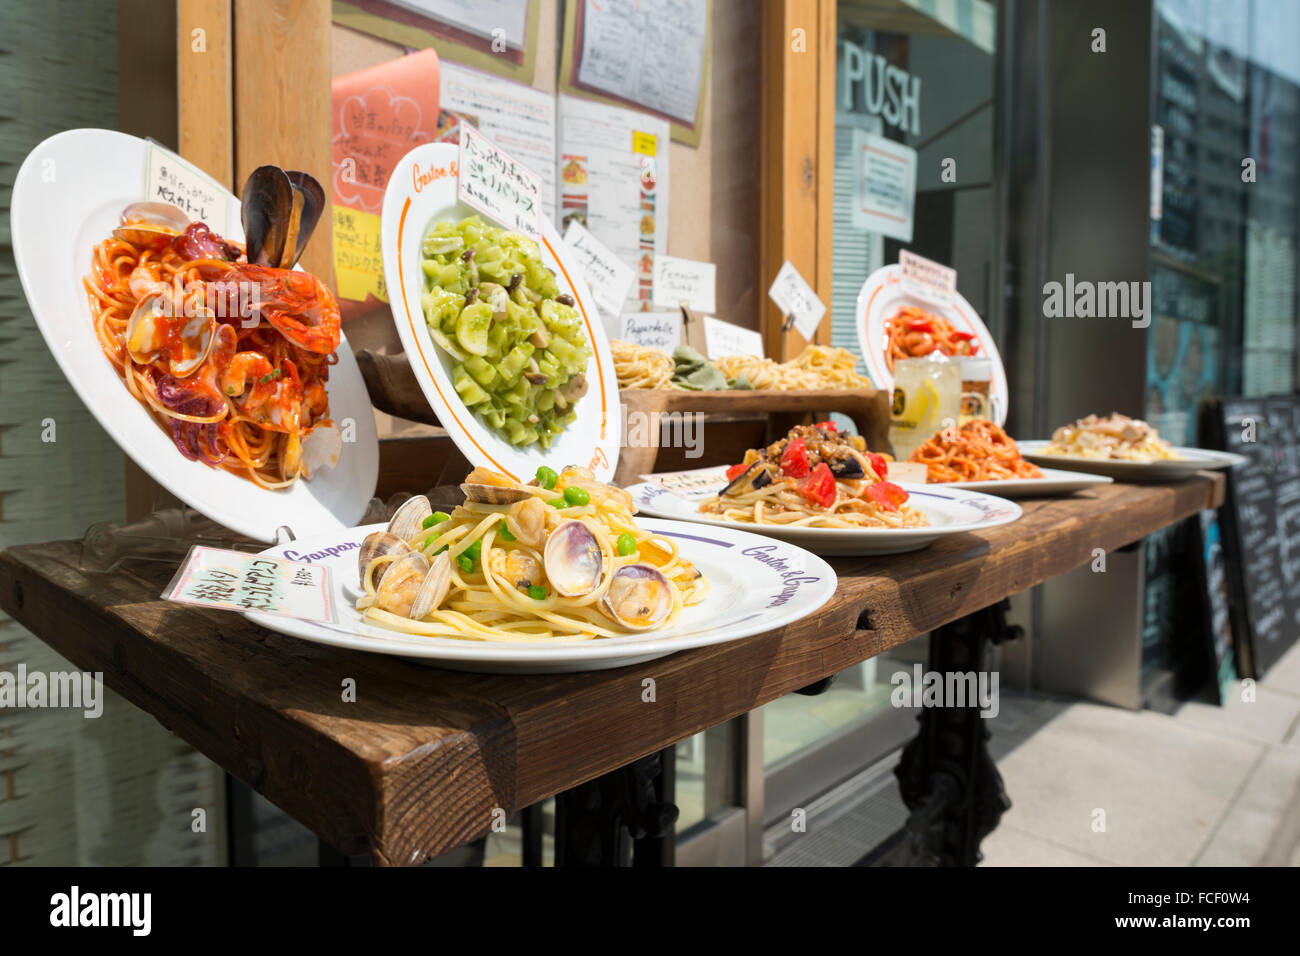 Wax models of pasta dishes outside a restaurant in Roppongi, Tokyo, Japan Stock Photo